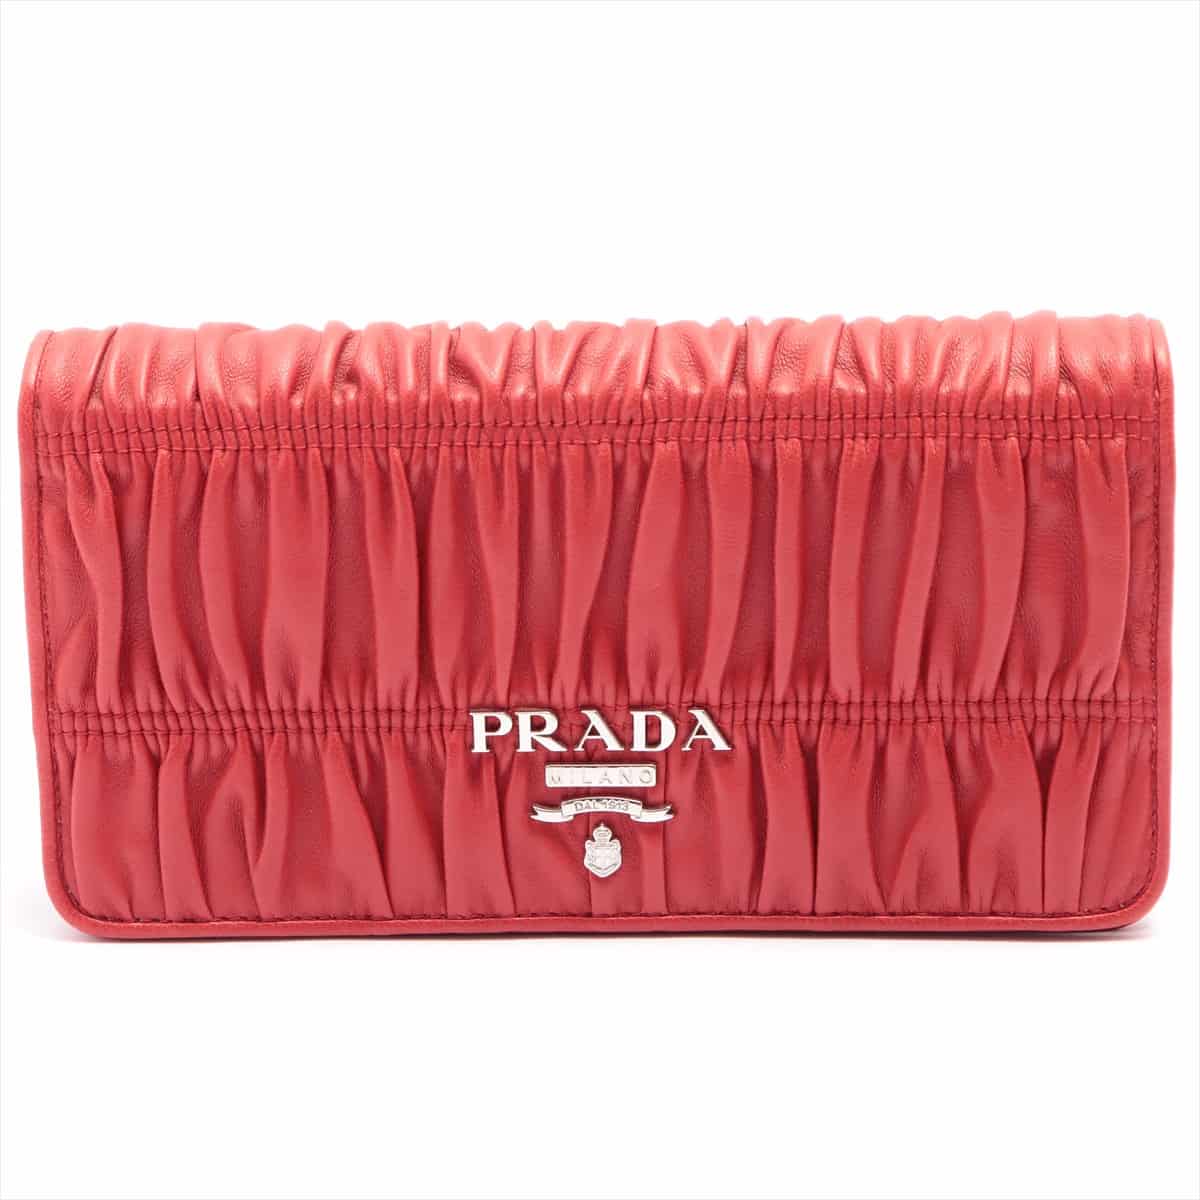 Prada Nappa Nappa leather Chain wallet Red 1DH044 open papers